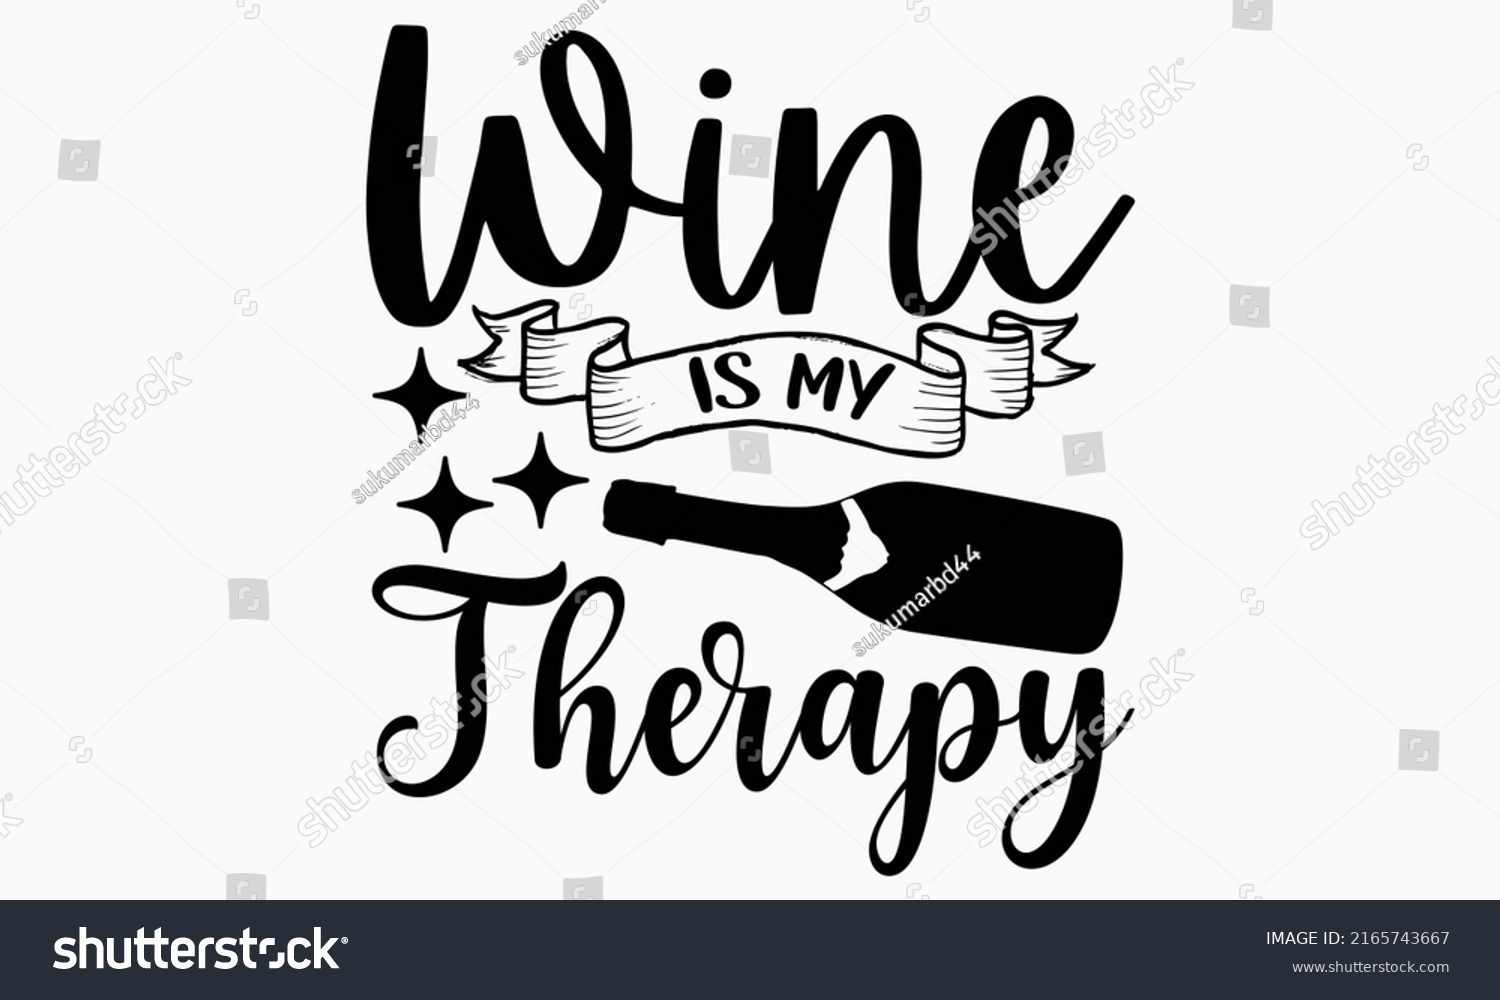 SVG of Wine is my therapy - Alcohol t shirt design, Hand drawn lettering phrase, Calligraphy graphic design, SVG Files for Cutting Cricut and Silhouette svg